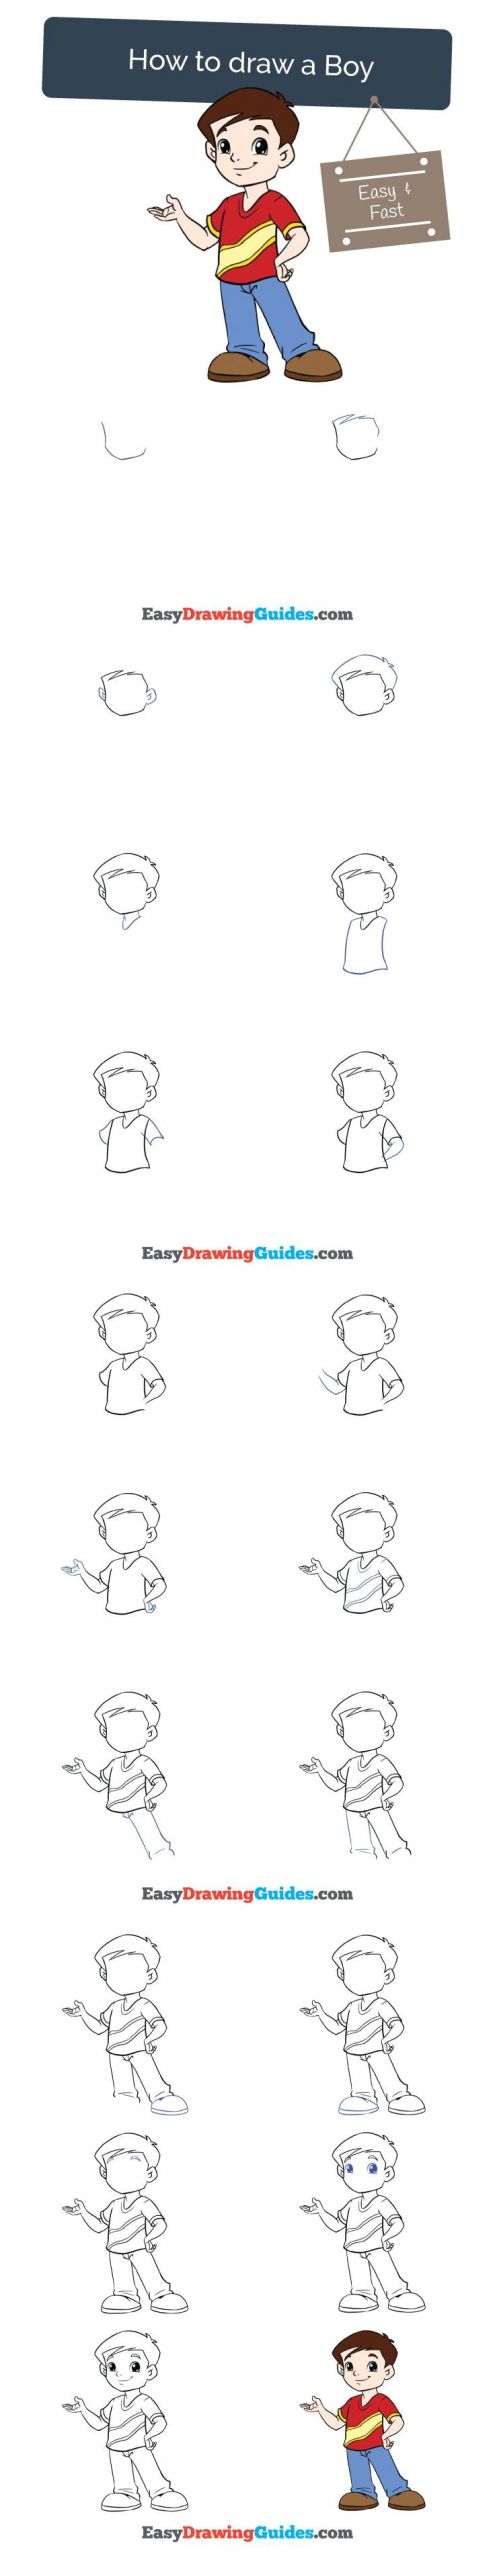 Easy Drawing Lessons Step by Step How to Draw A Boy Drawing Tutorials for Kids Easy